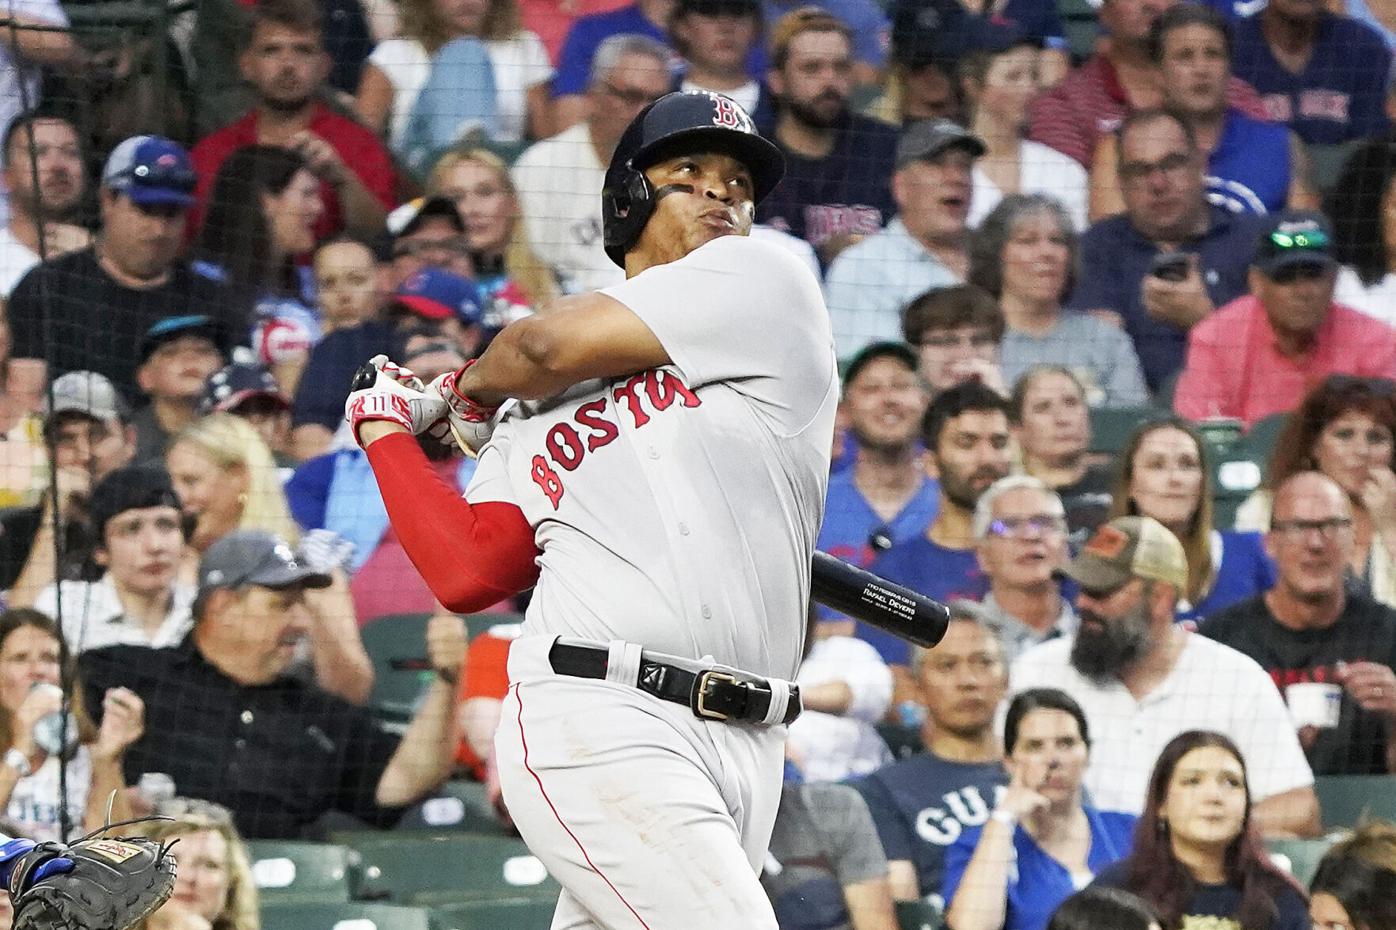 Rafael Devers' prediction to Red Sox teammate on plane from D.R.